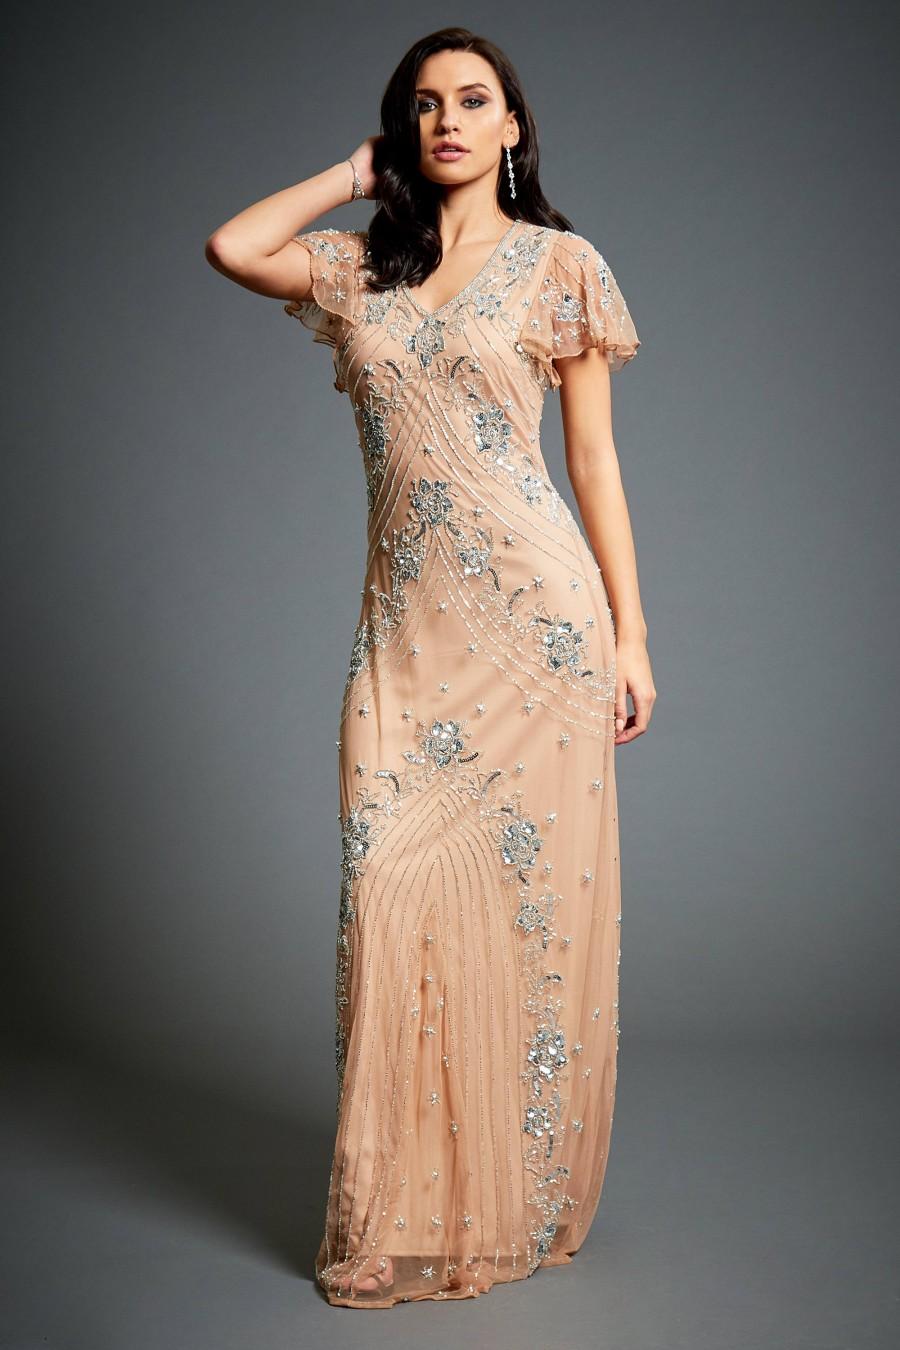 1920s style wedding guest dresses